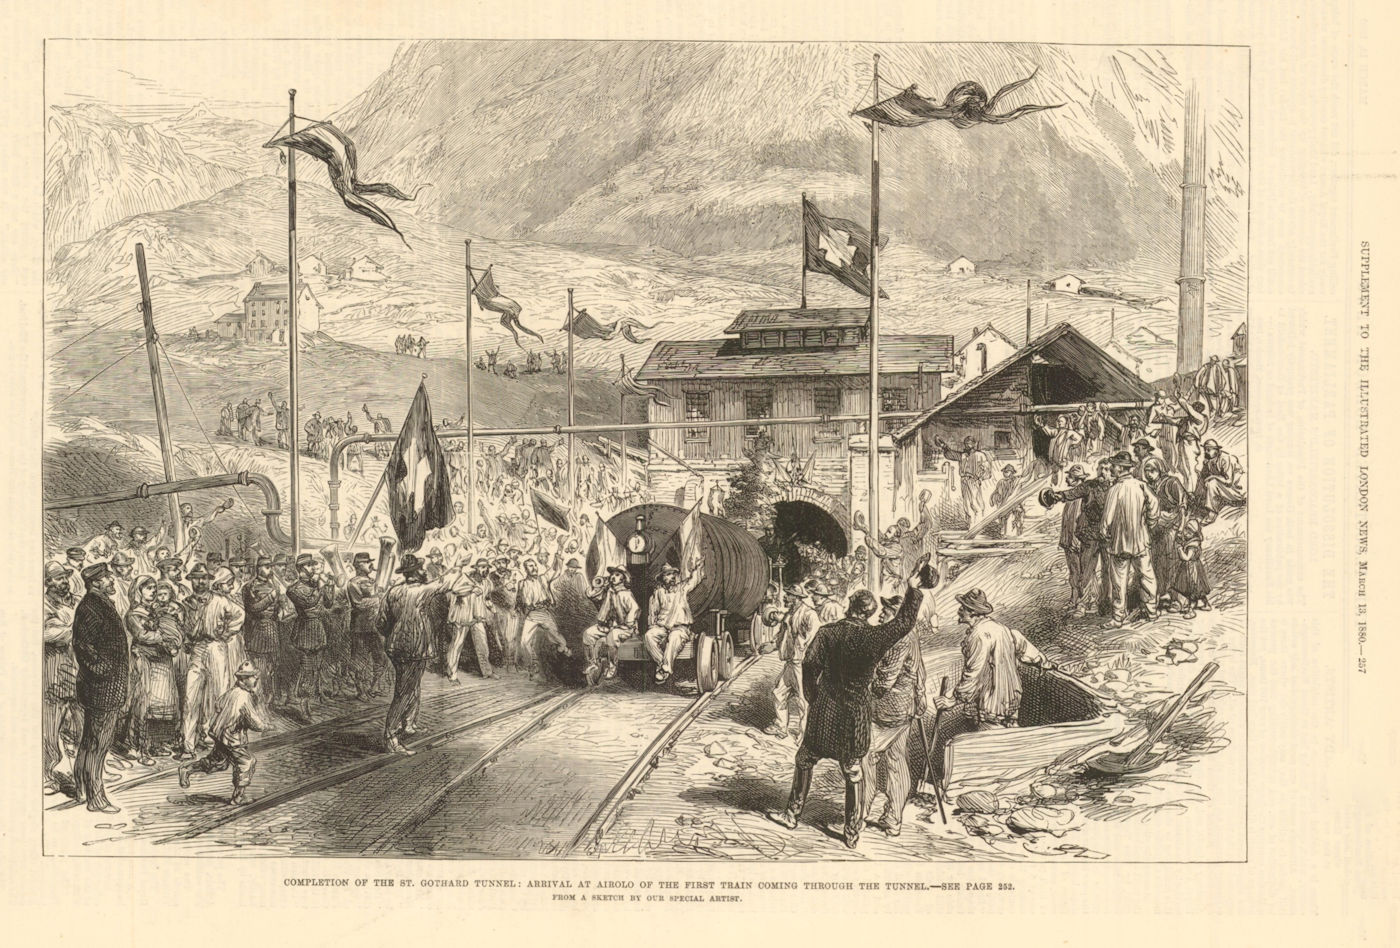 Associate Product St Gotthard Tunnel completion: First train arriving at Airolo 1880 ILN print